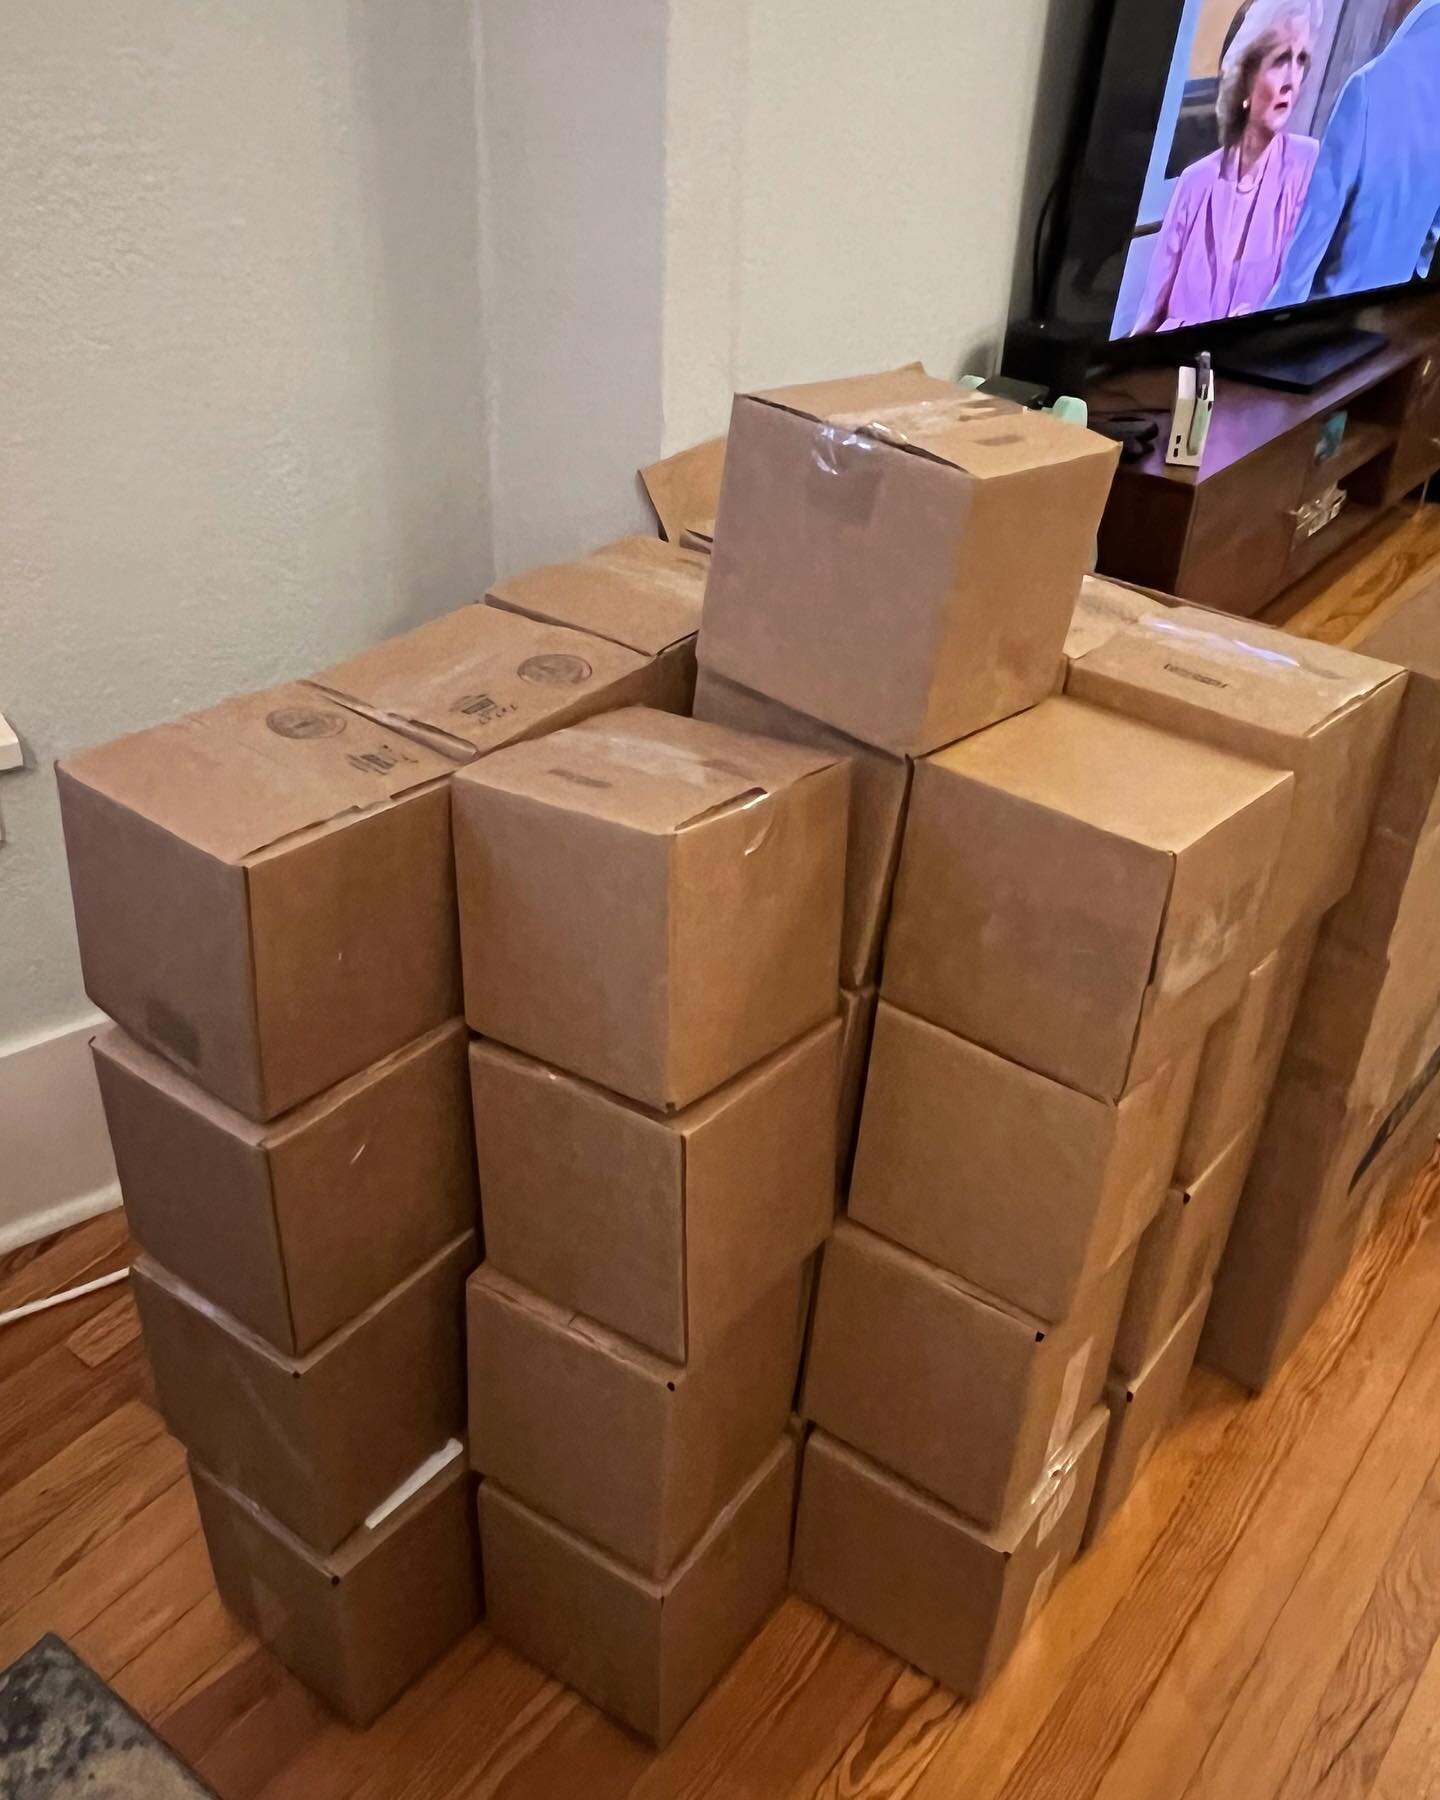 We received all the Kickstarter rewards throughout October and spent a good chunk of the day yesterday packing, printing labels, and making sure they will all get to their homes safely. We&rsquo;re planning on shipping them out later today and everyo